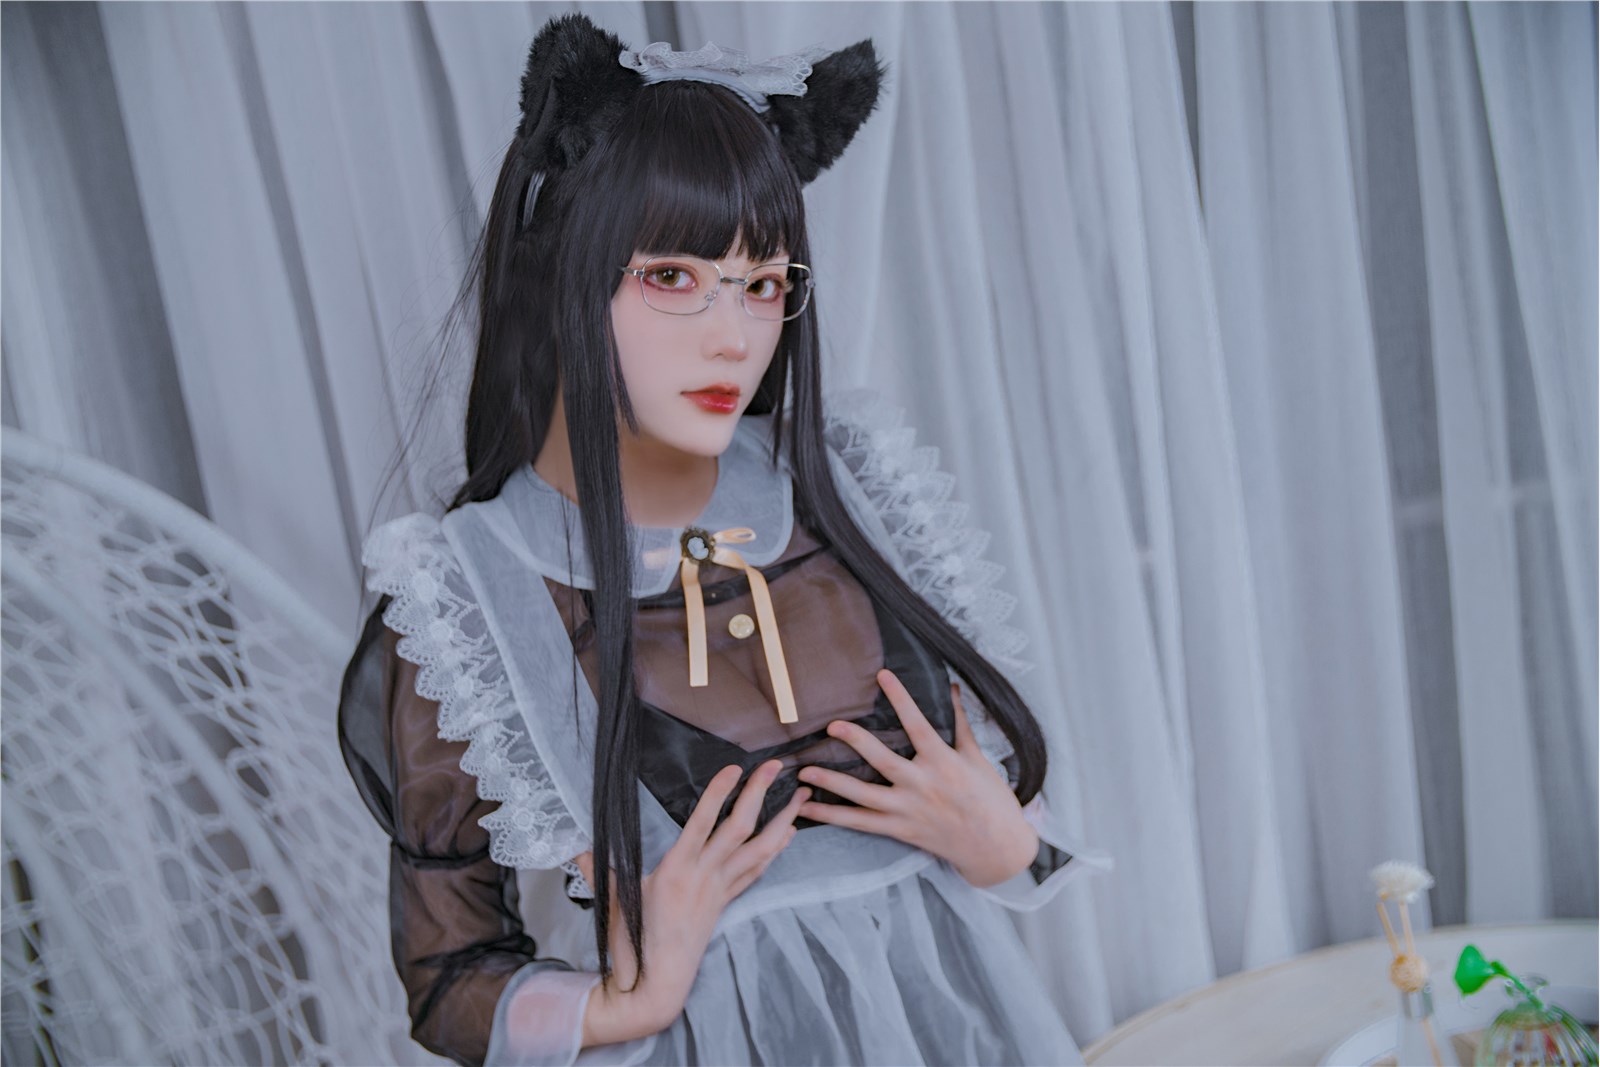 Cosplay cheese Wii - black transparent maid(9)